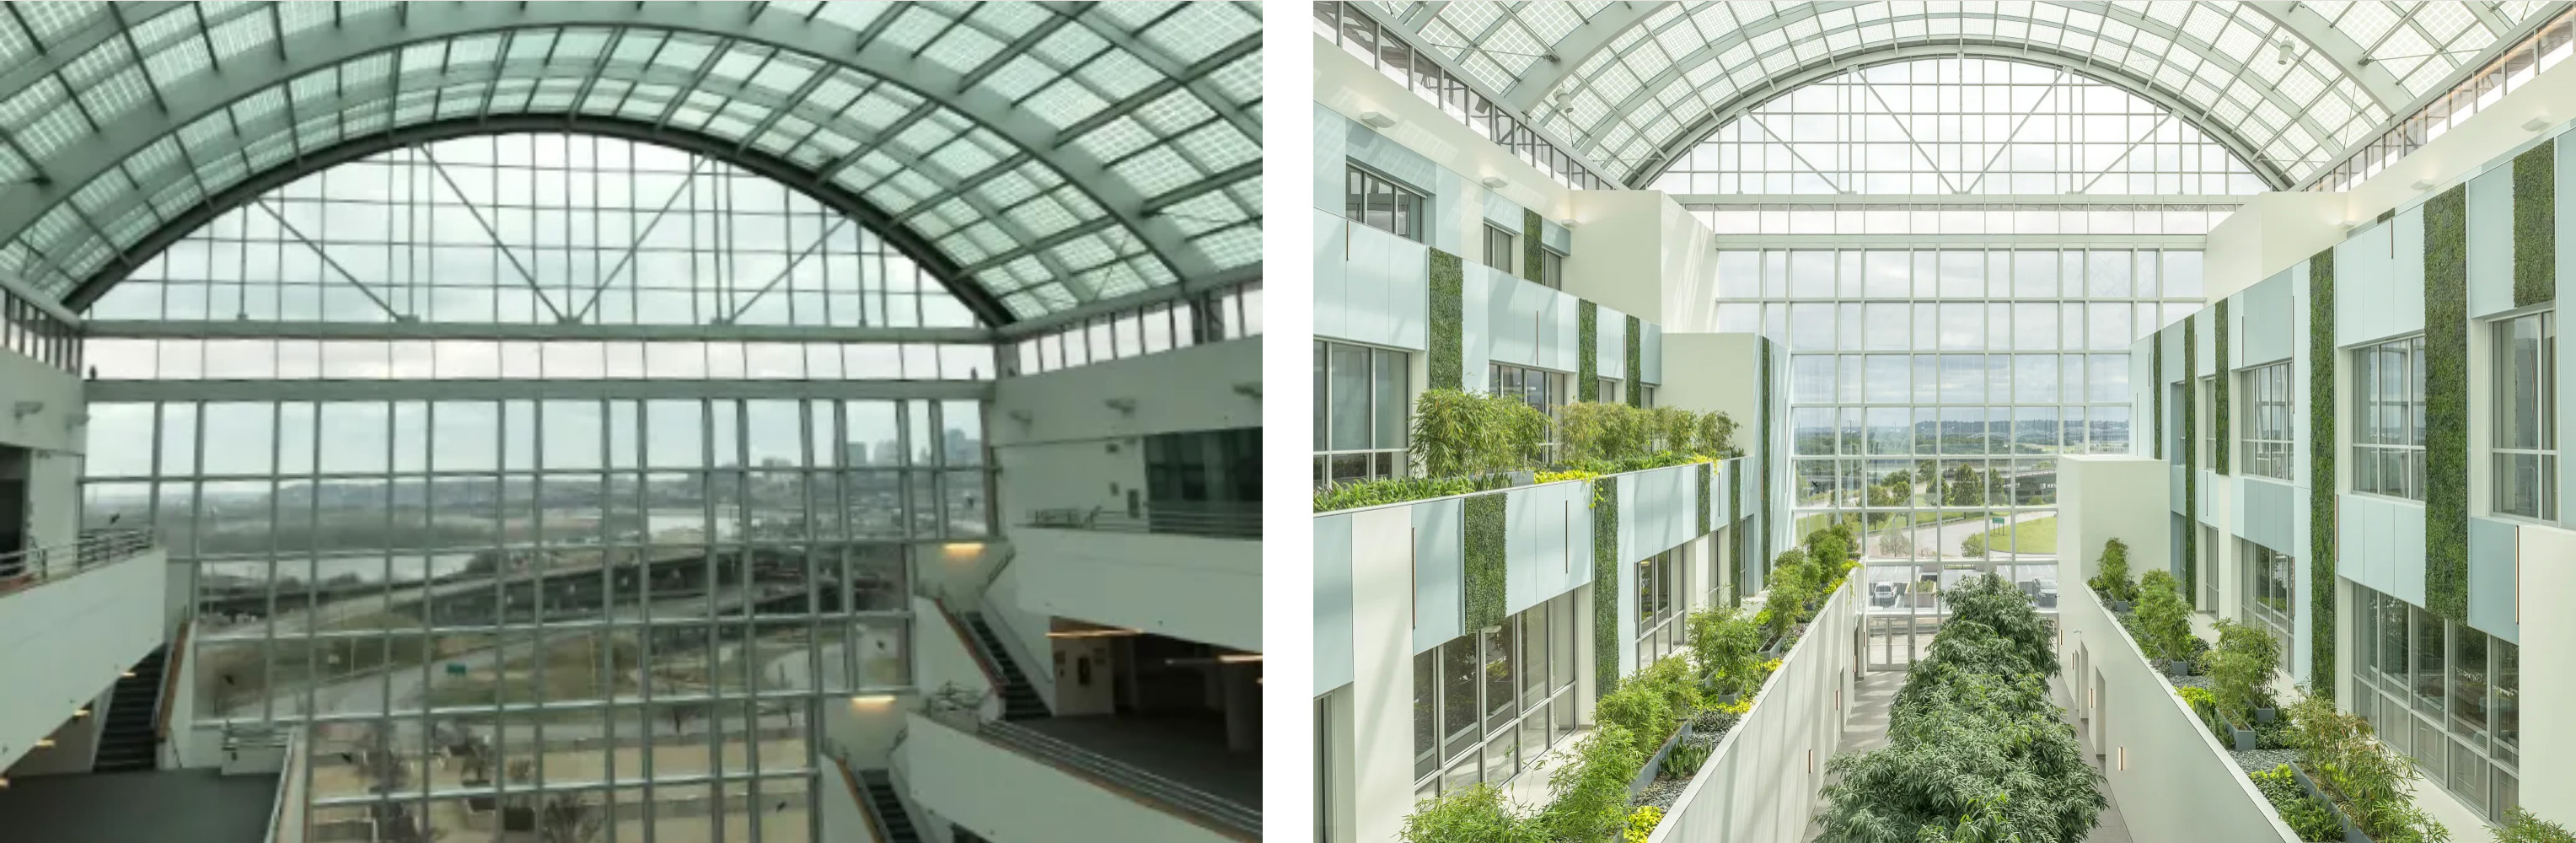 Before and after of university building interior